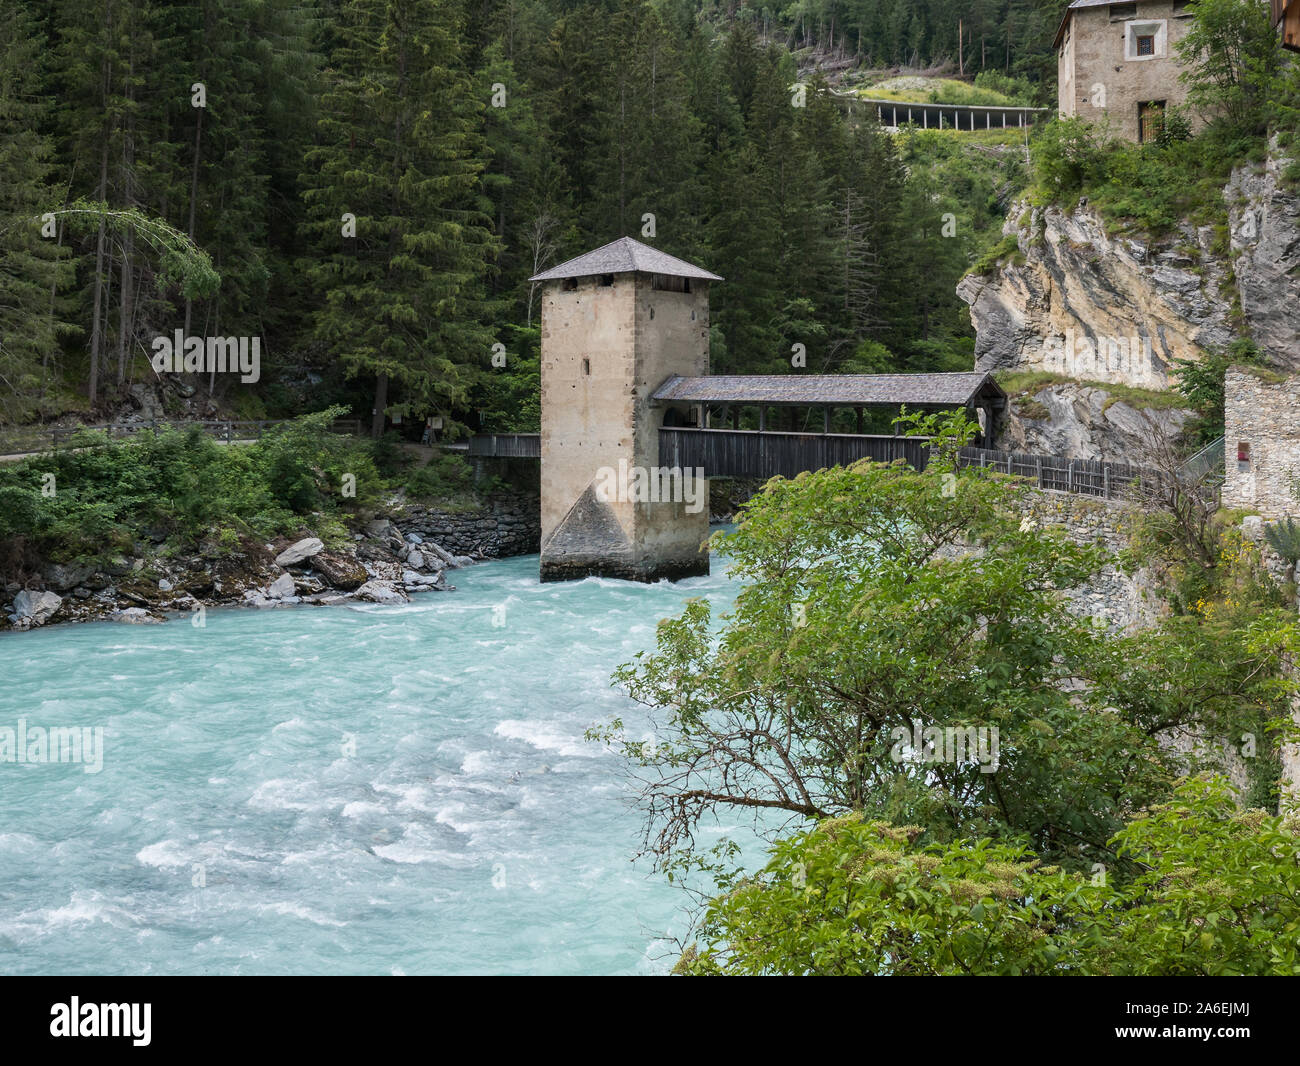 View of castle and fortress Altfinstermuenz, Nauders, Tyrol, Austria Stock Photo